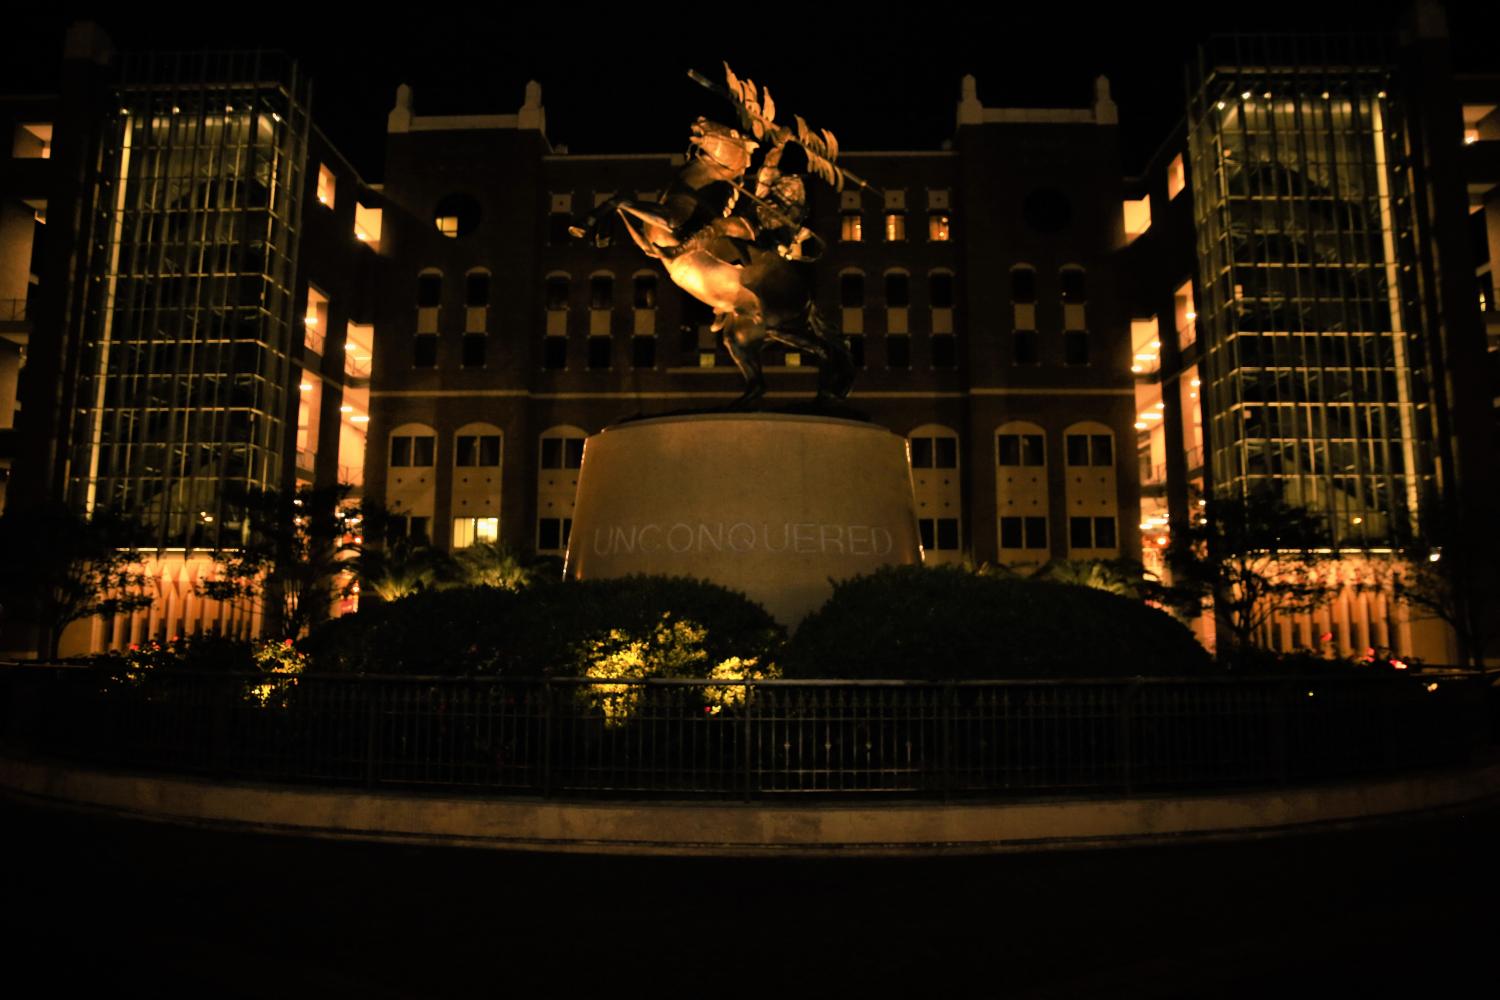 "The Unconquered statue in front of the FSU Stadium"